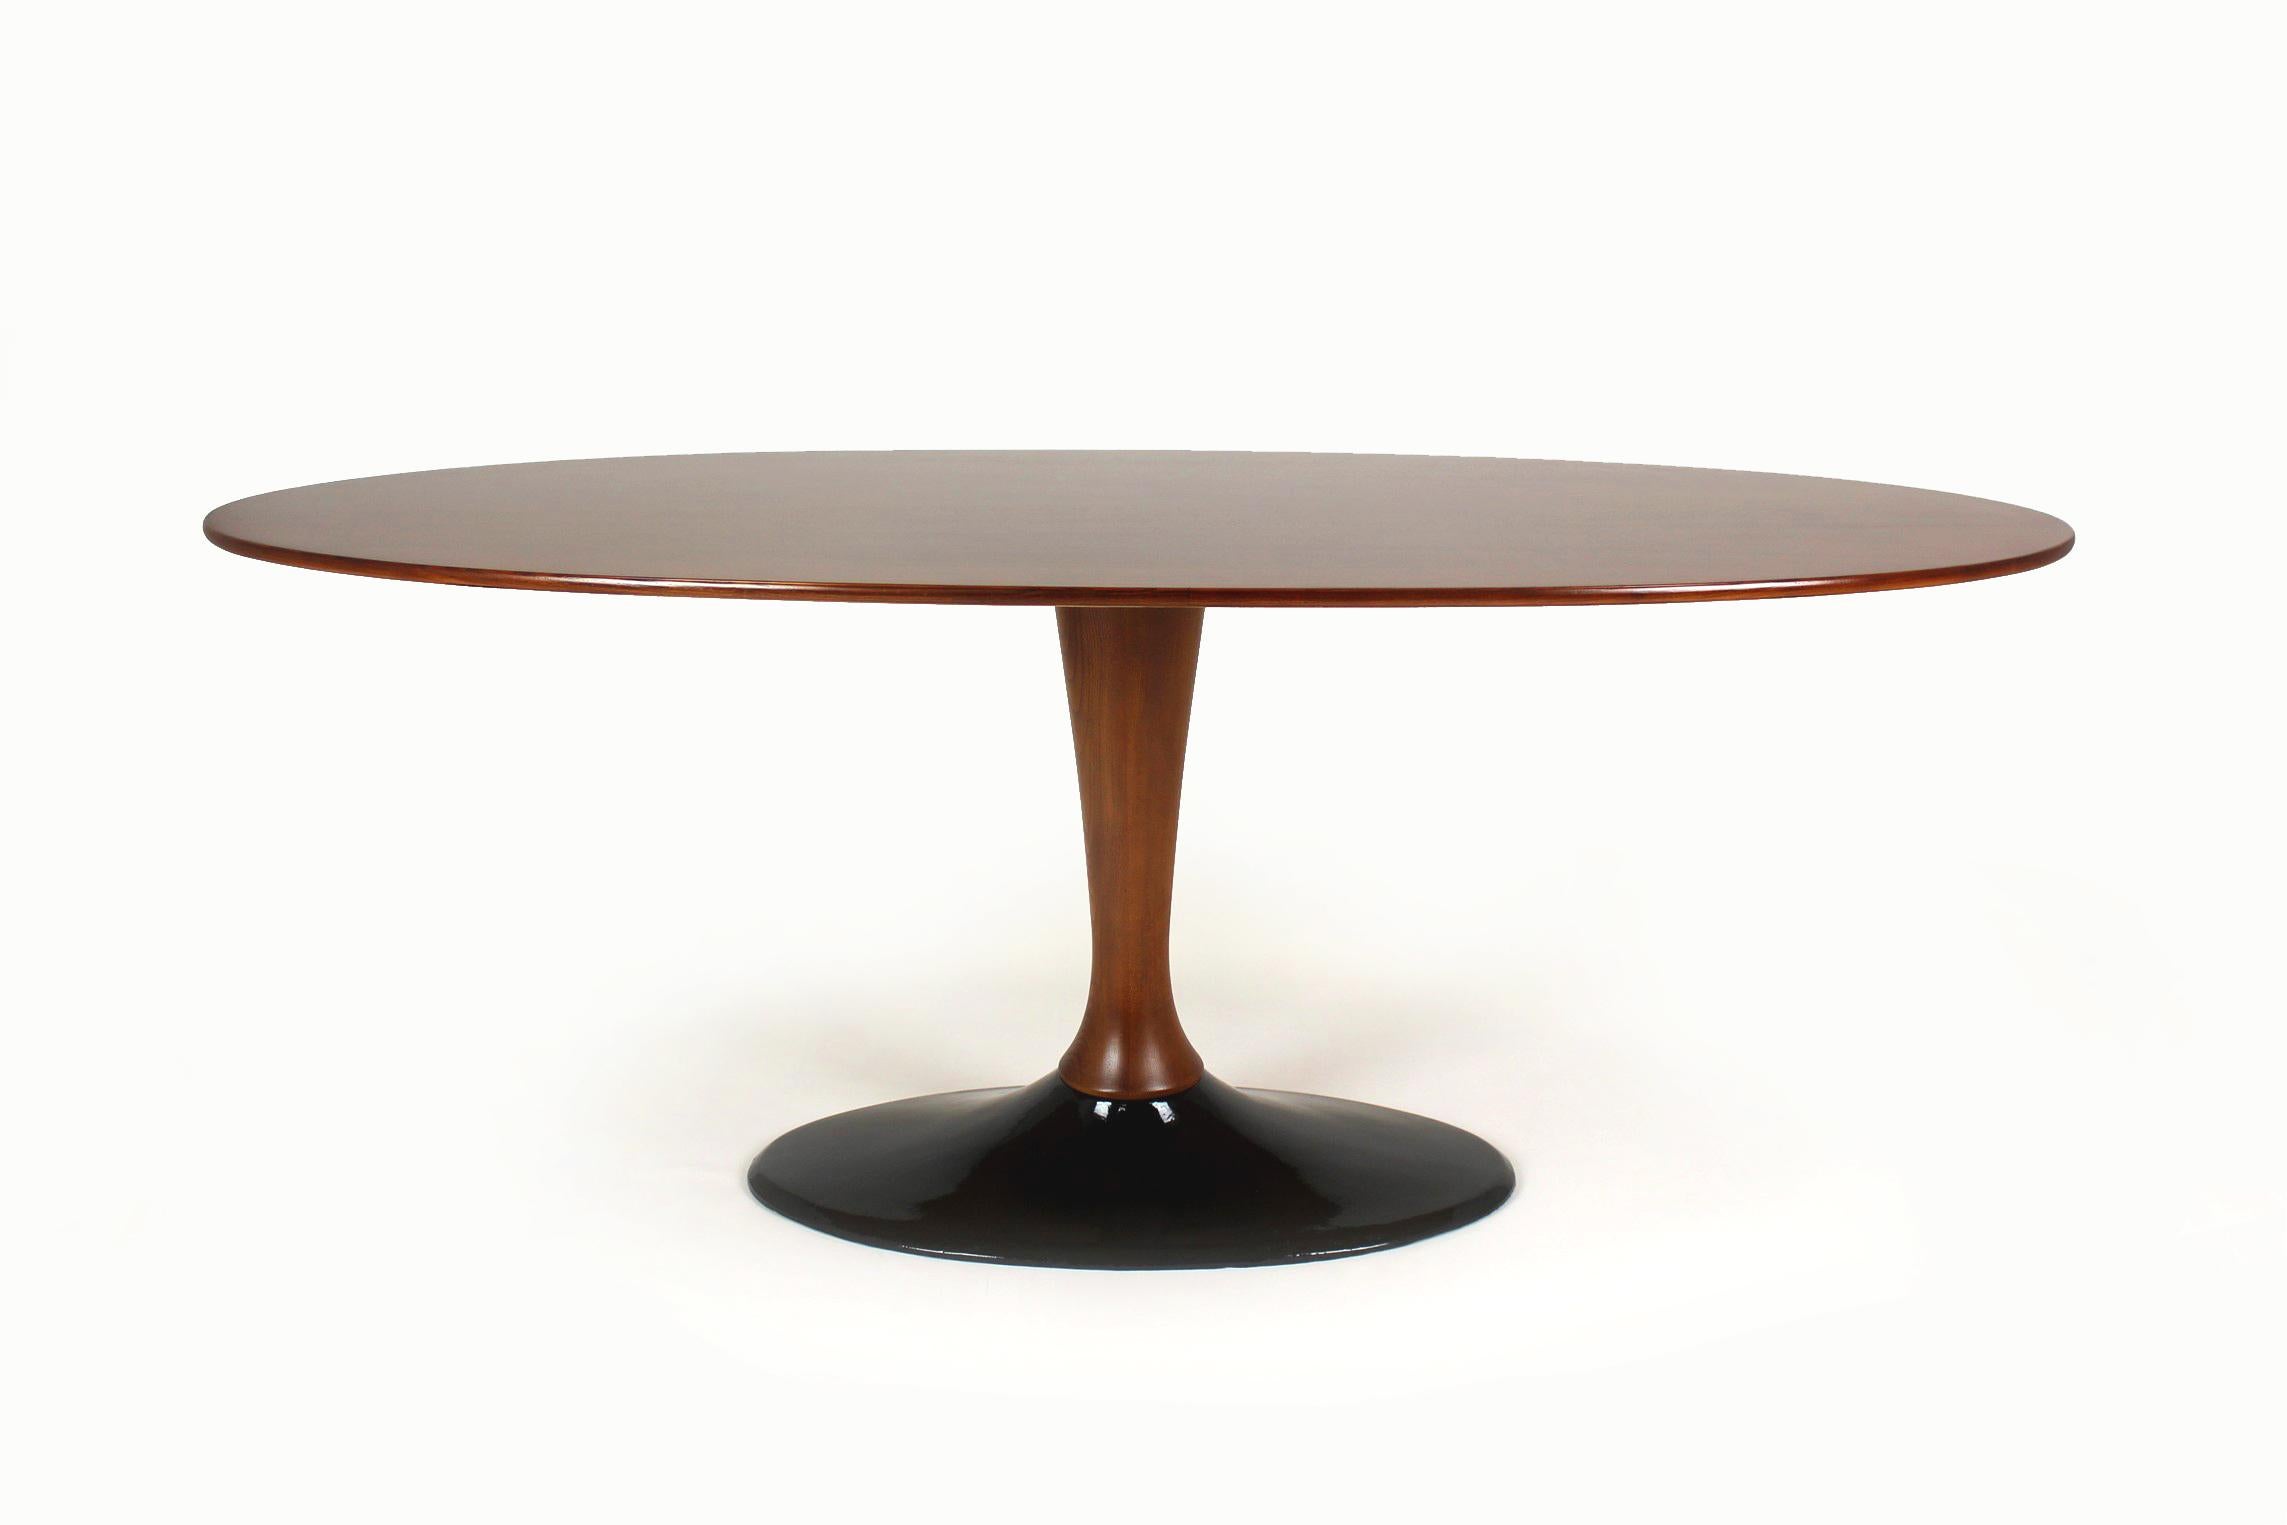 Steel Restored Mid-Century Modern Oval Ash Coffee Table from Drevotvar, 1960s For Sale